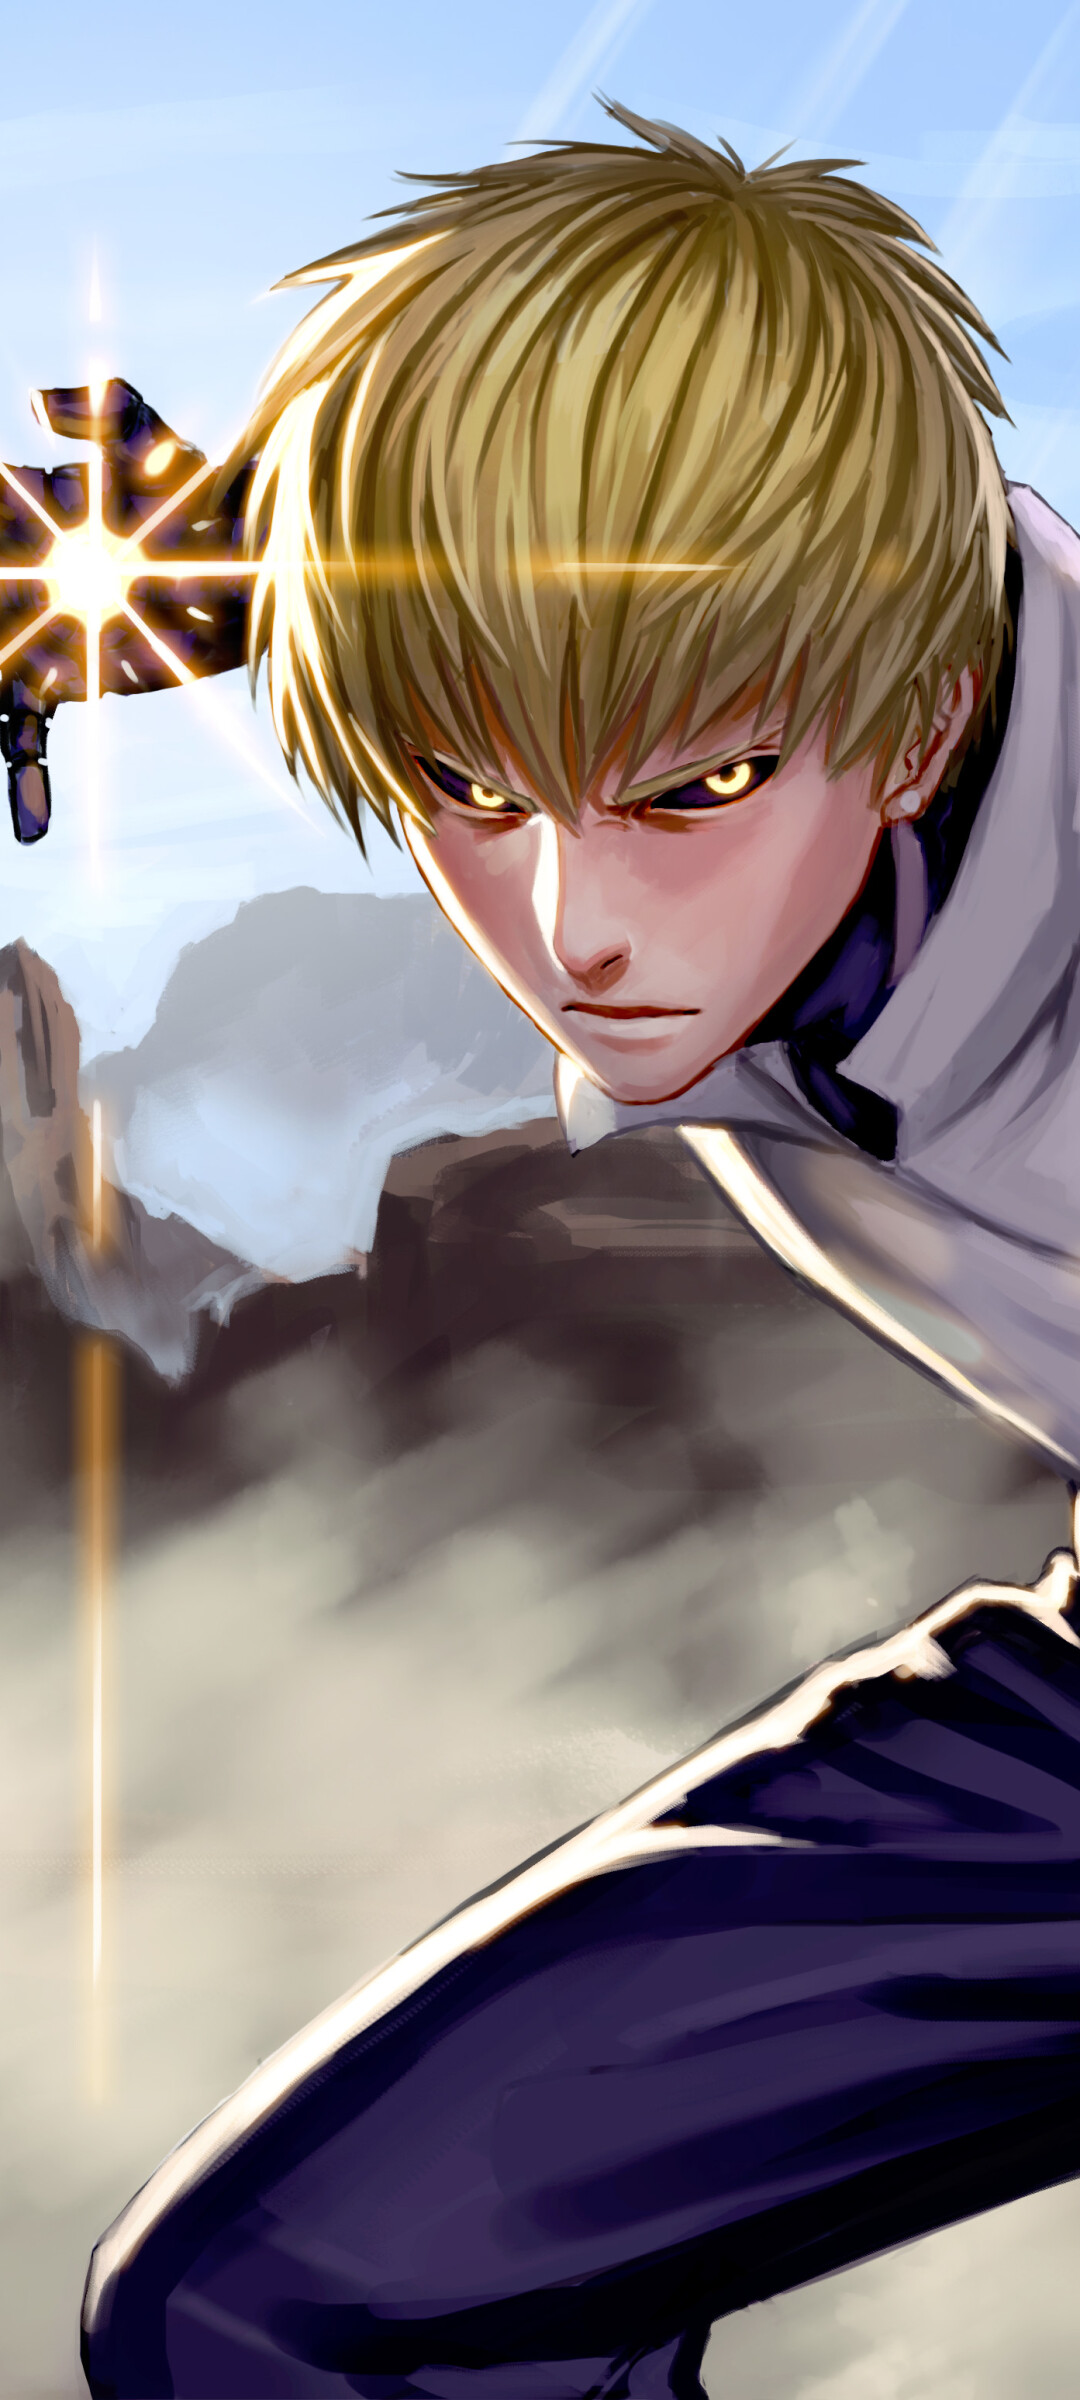 Genos: Anime One-Punch Man, The deuteragonist of One-Punch Man, A 19-year-old cyborg. 1080x2400 HD Background.